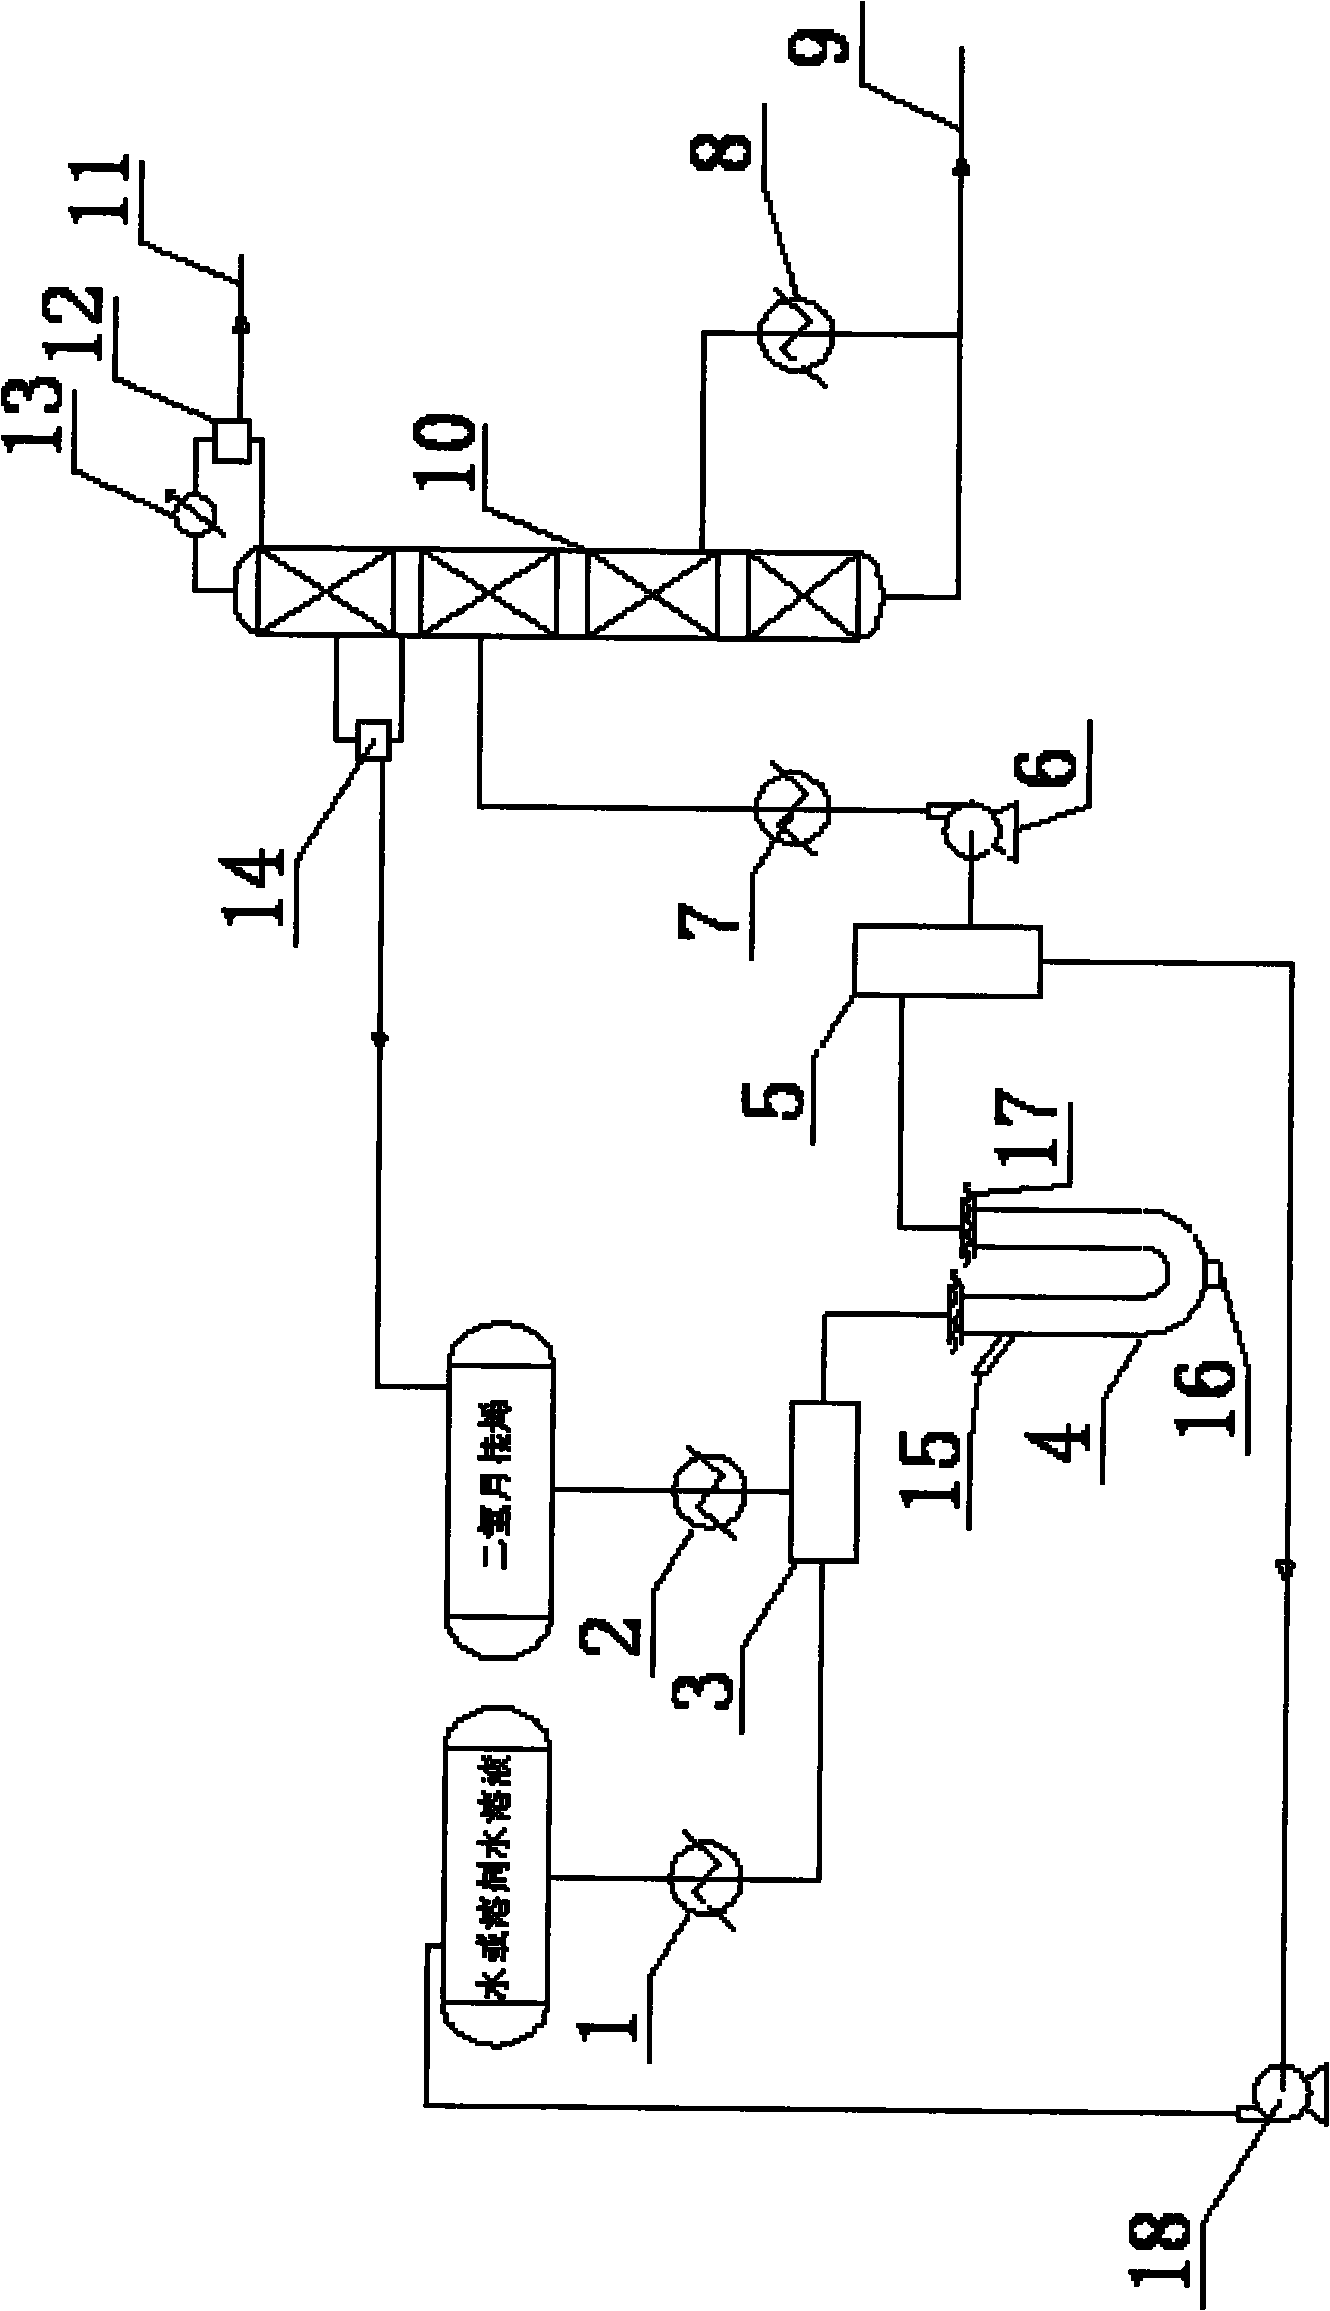 Dihydromyrcenol fixed bed hydration continuous production method